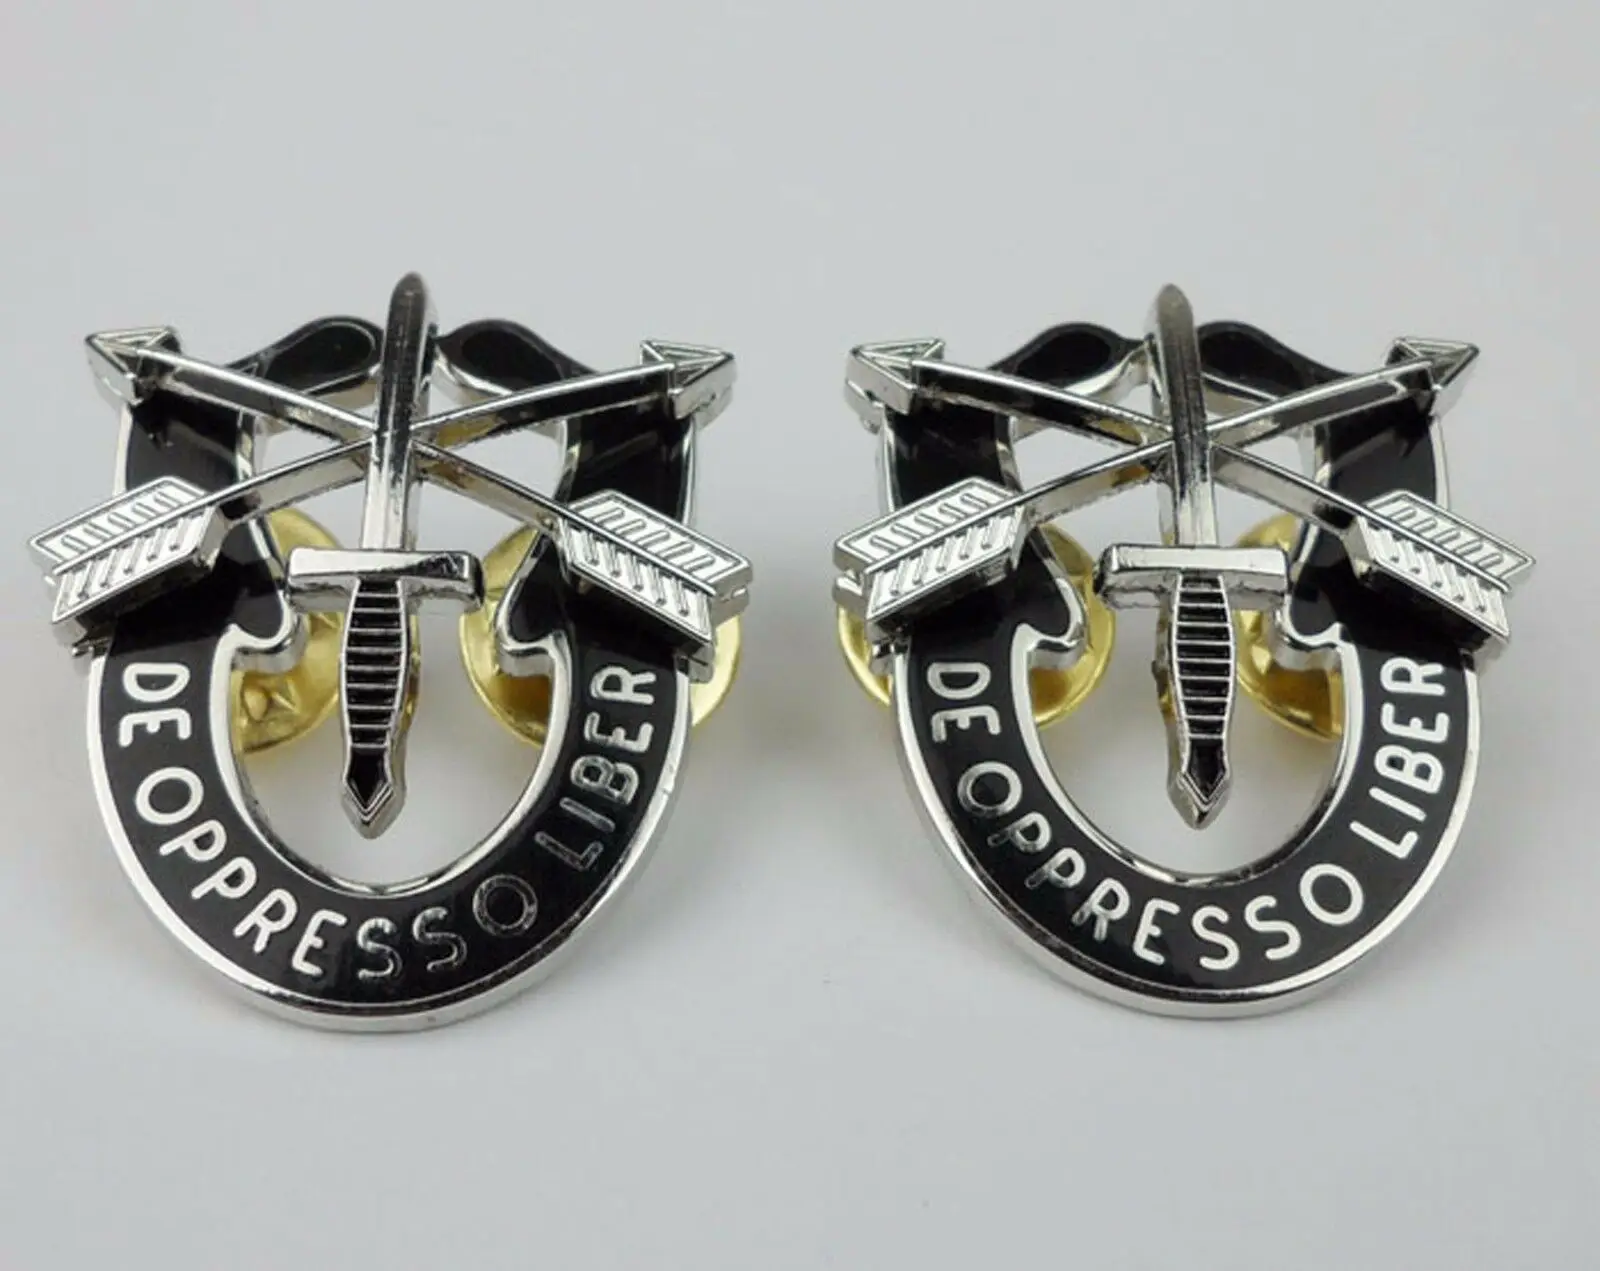 Details about   US ARMY SPECIAL FORCES BERET BADGE PIN & SF COLLAR INSIGNIA CLASSIC MILITARY 